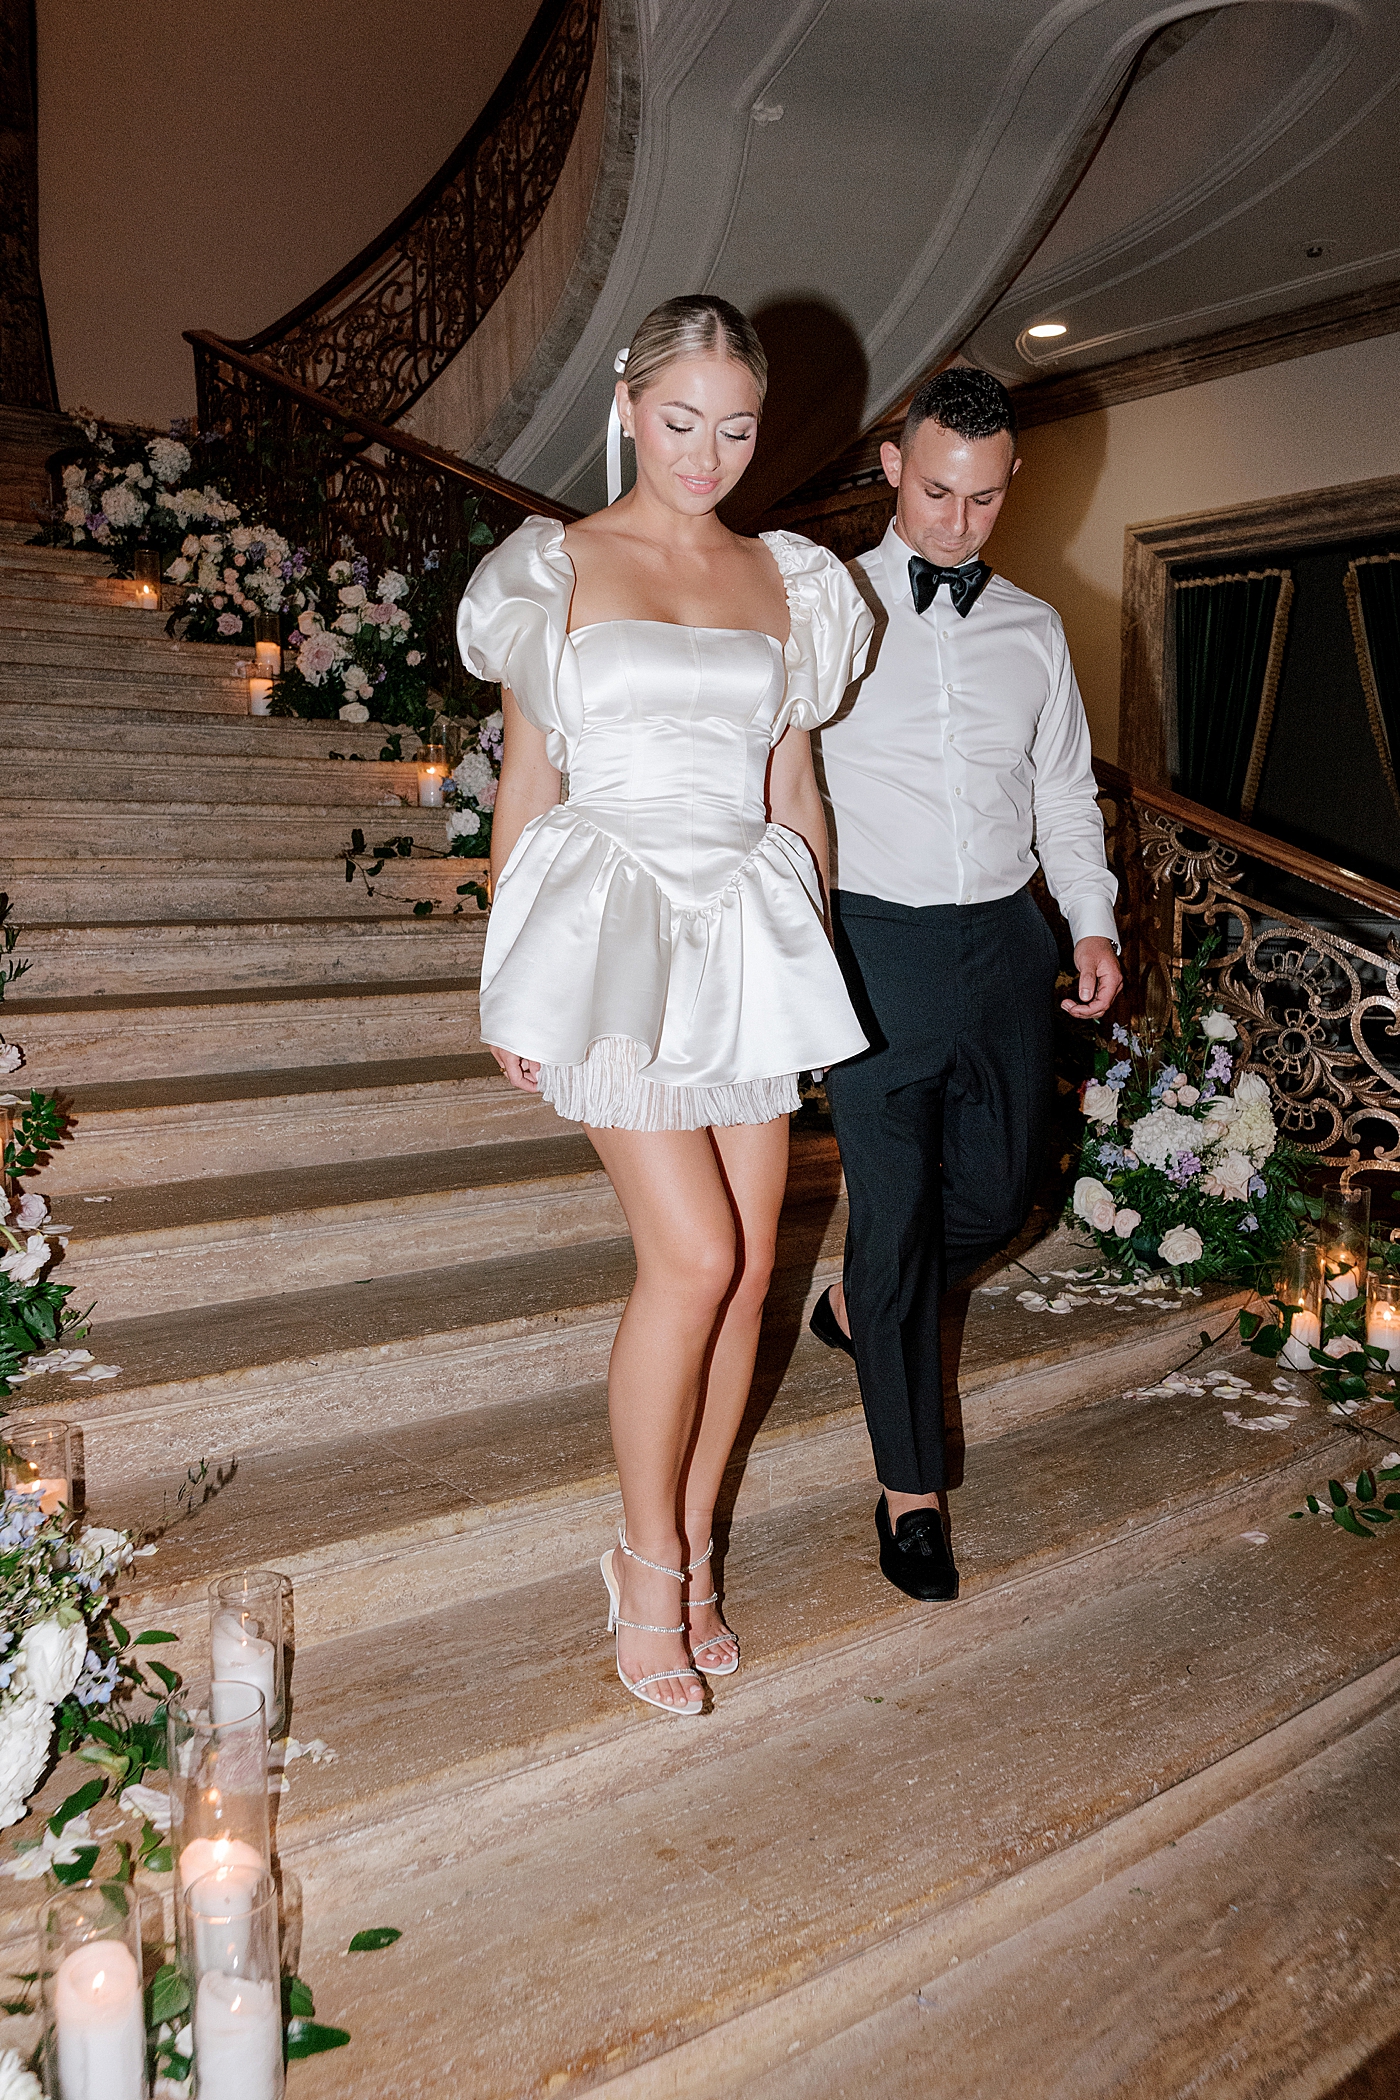 Bride and groom walking down stairs | Image by Hope Helmuth Photography